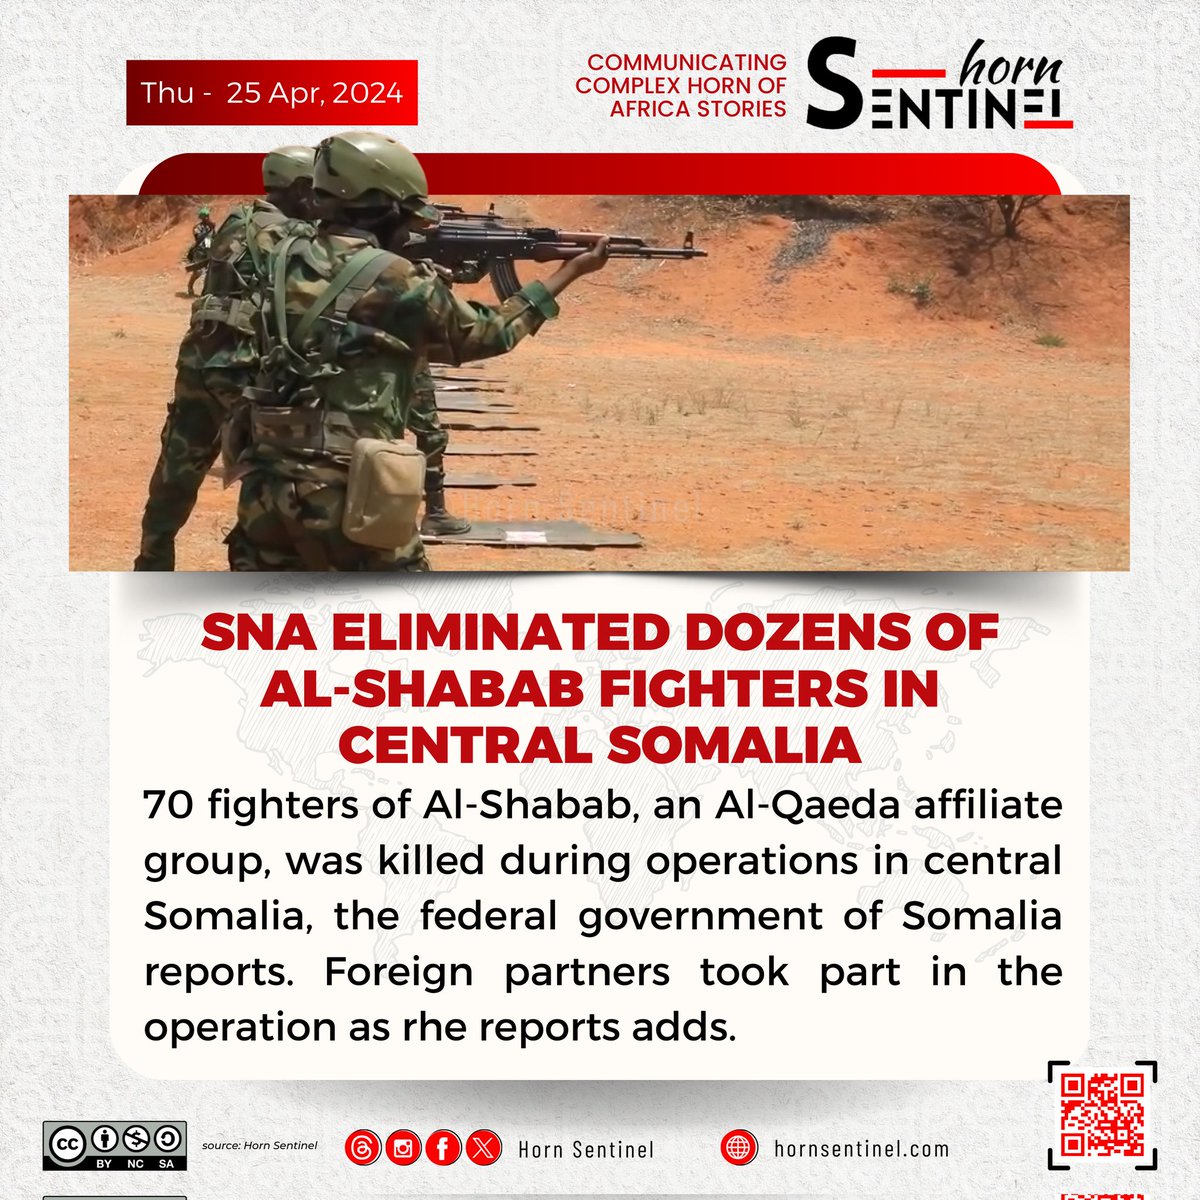 70 fighters of #AlShabab, an #AlQaeda affiliate group, was killed during operations in central Somalia, the federal government of #Somalia reports. Foreign partners took part in the operation, the reports adds.